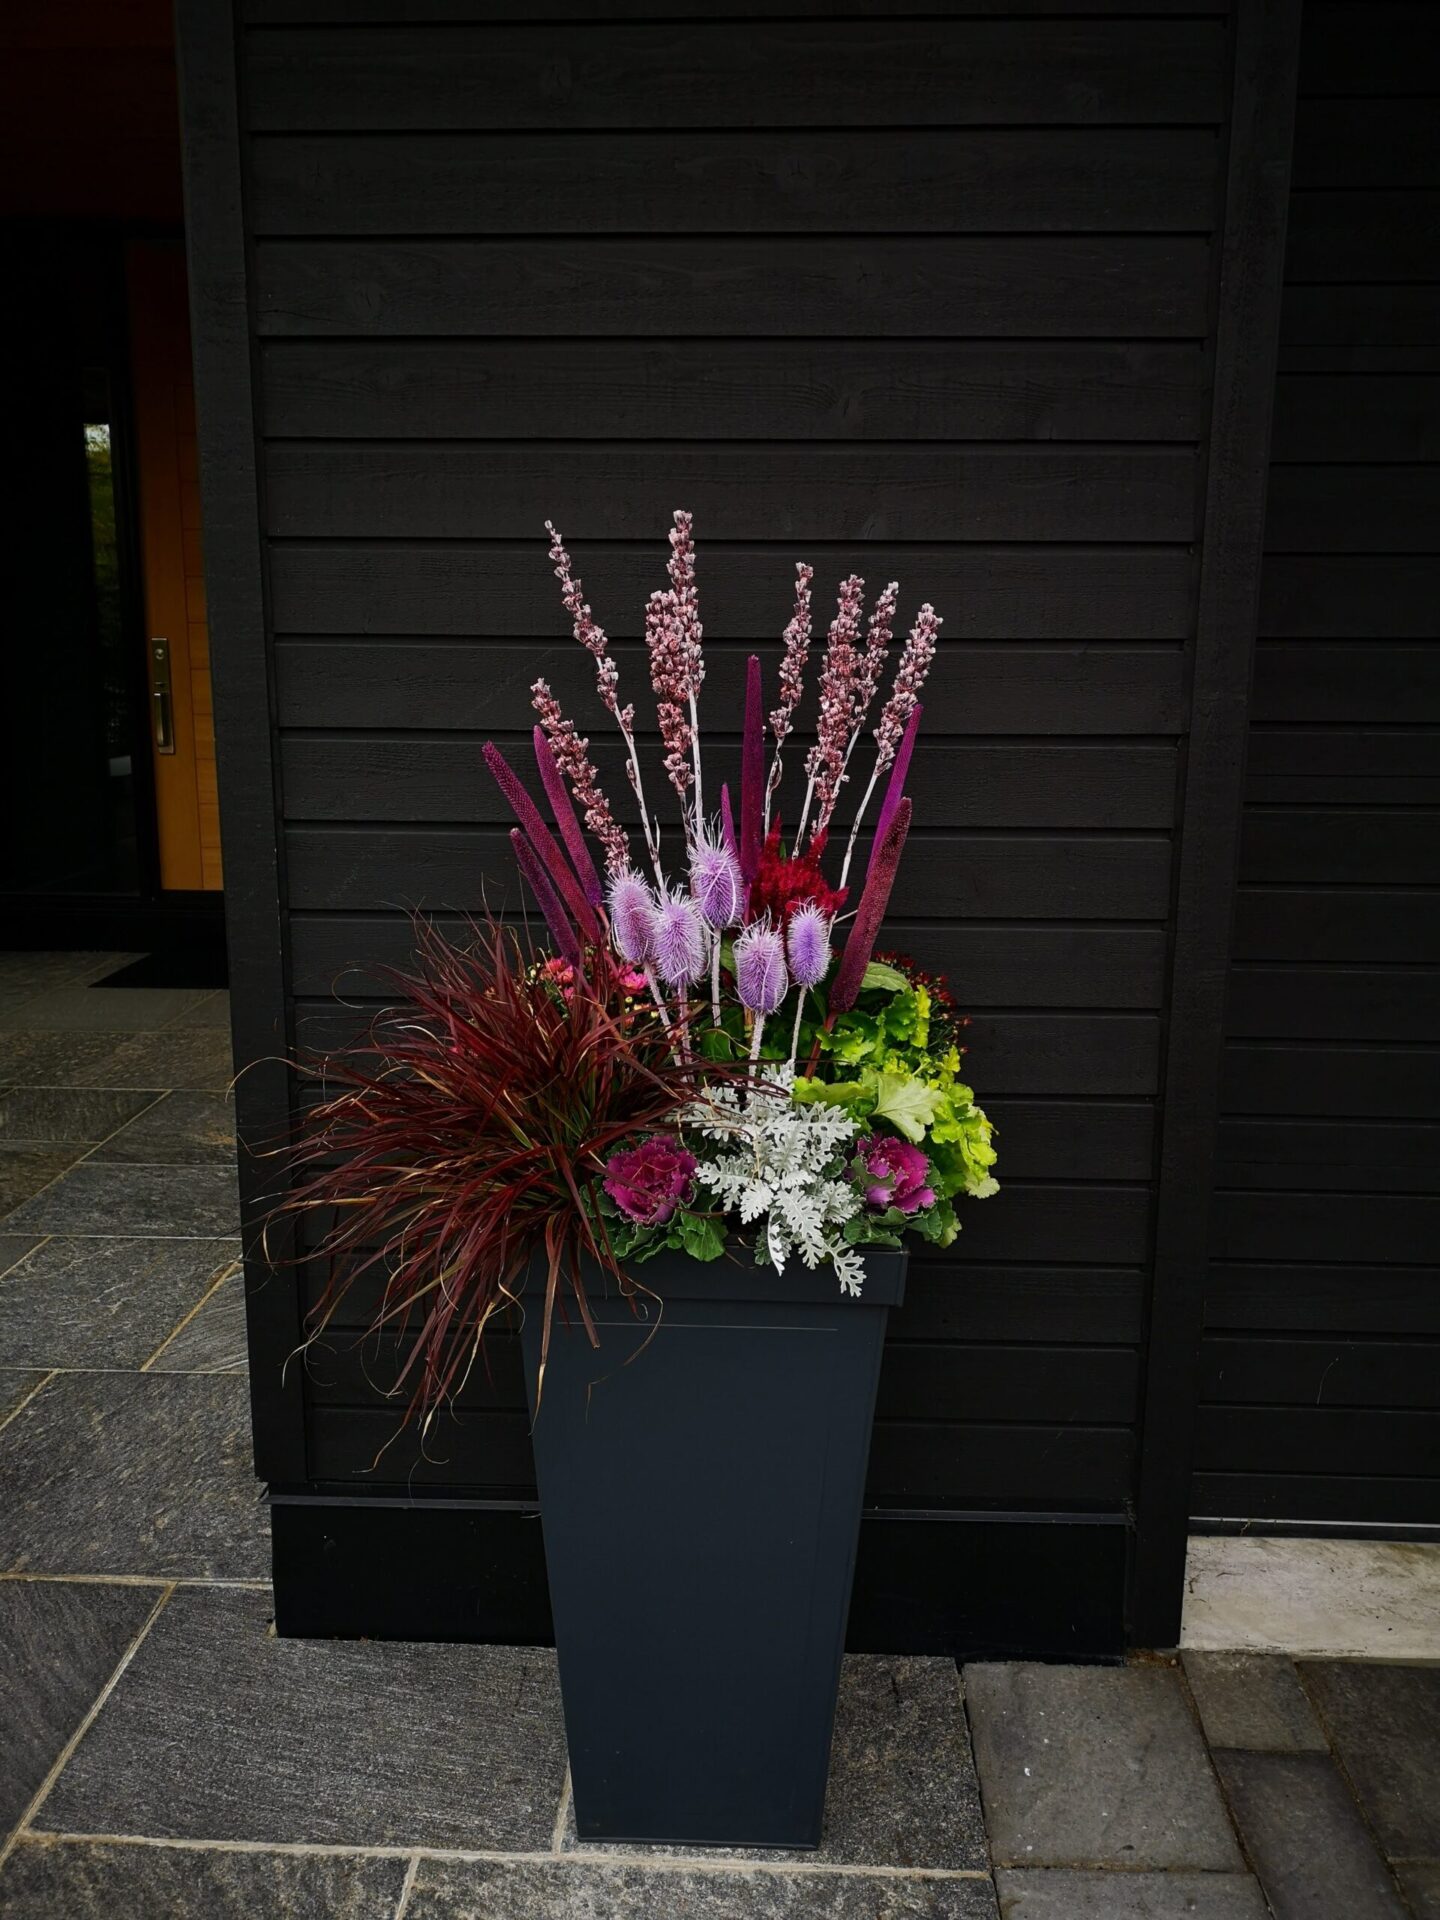 A tall black planter filled with vibrant flowers and ornamental grasses, set against a dark wooden backdrop by a stone paved area.